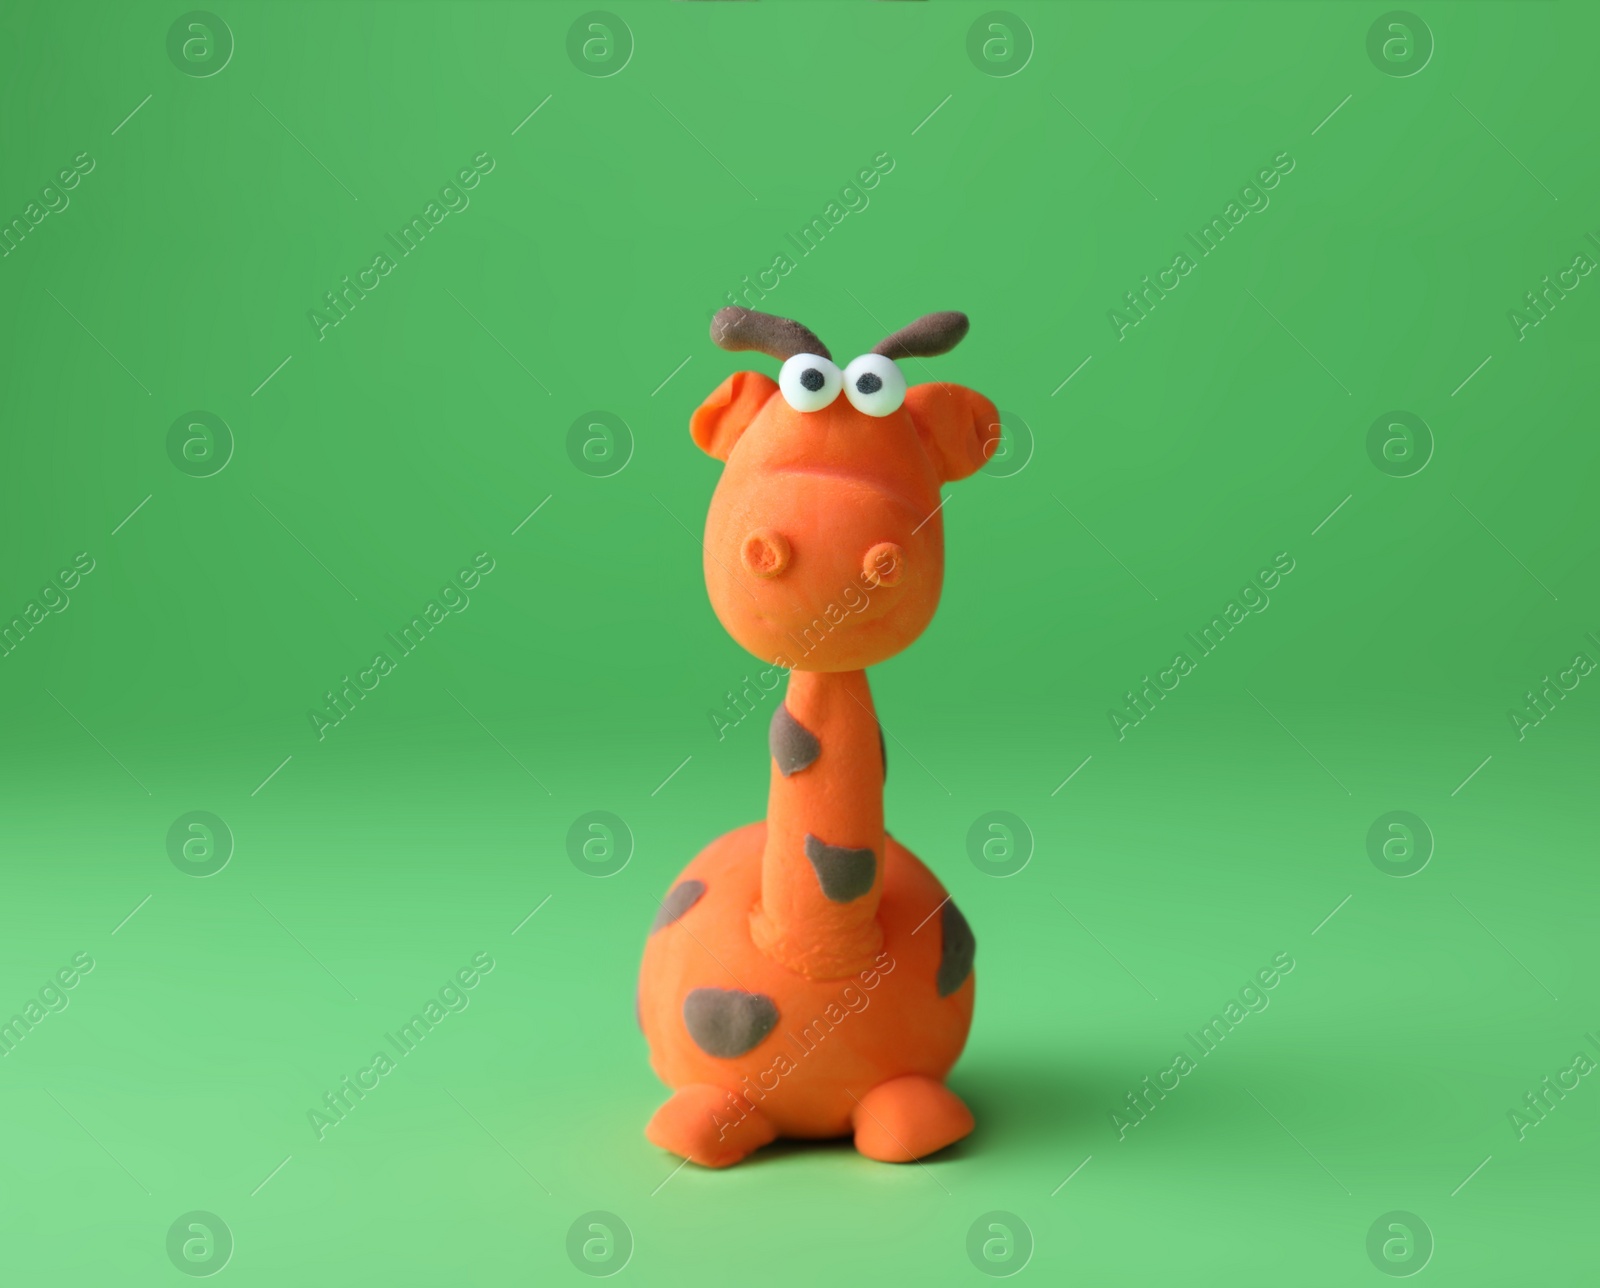 Photo of Small giraffe made from play dough on green background